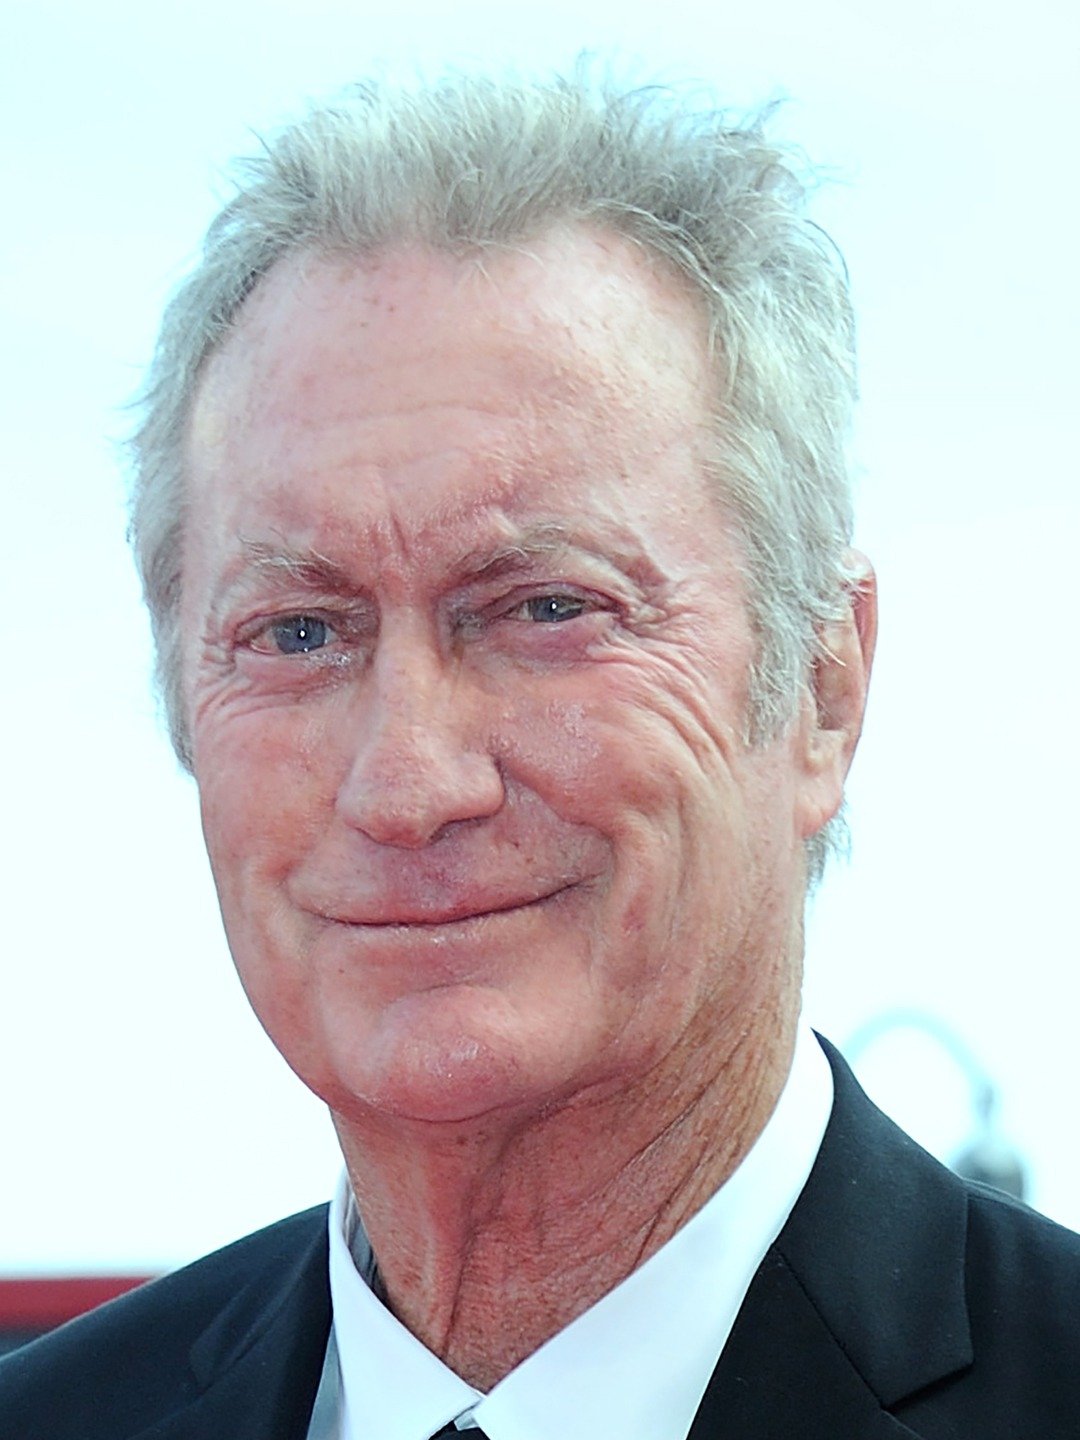 How tall is Bryan Brown?